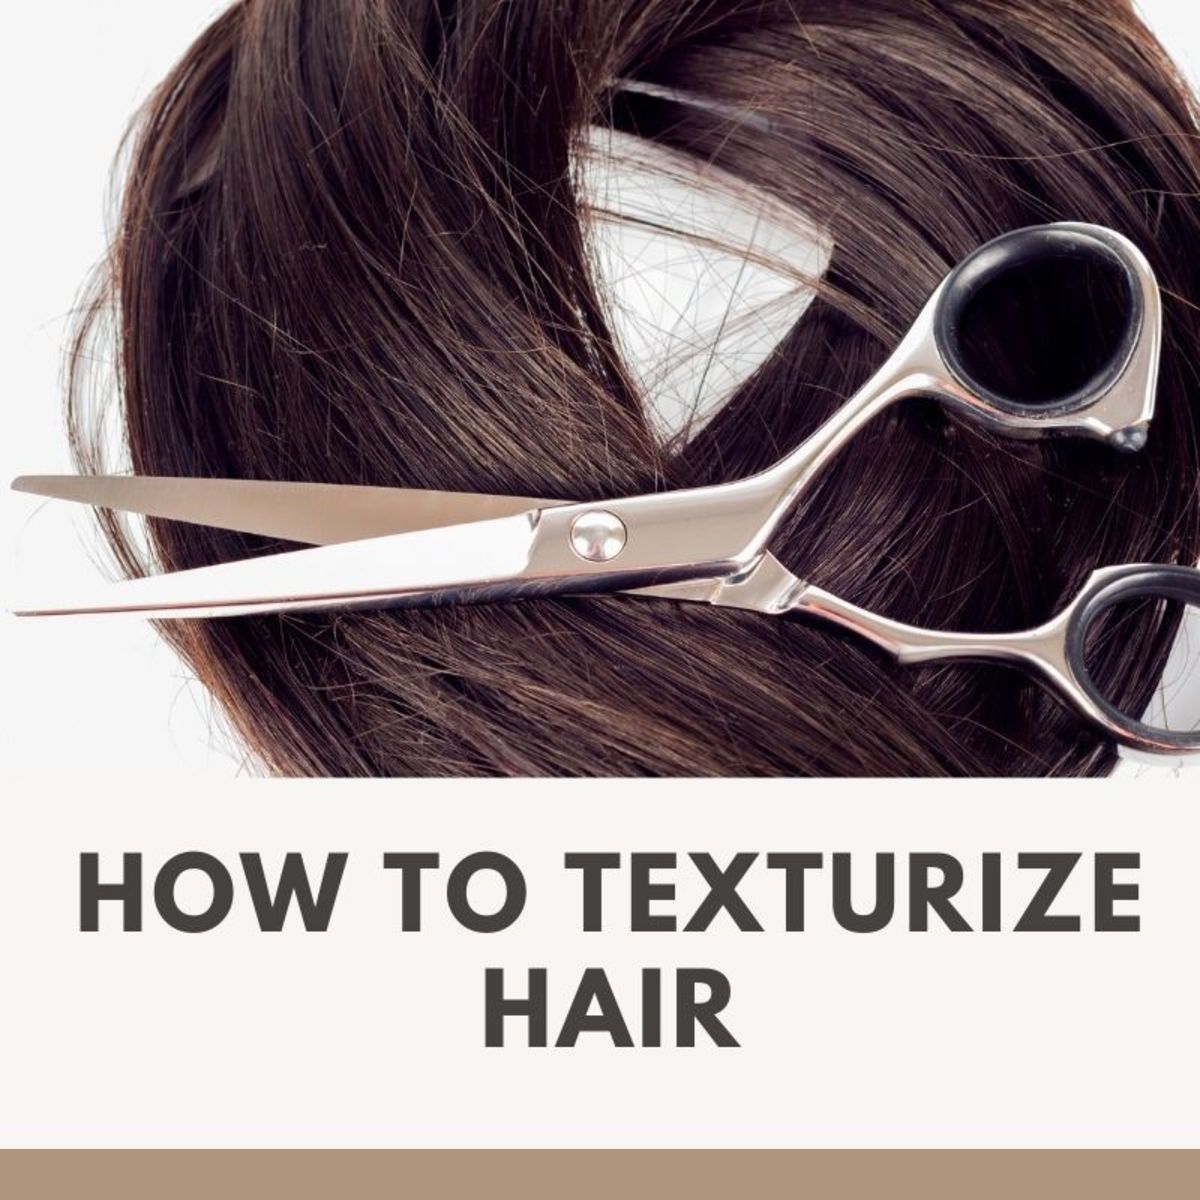 How to Texturize Hair